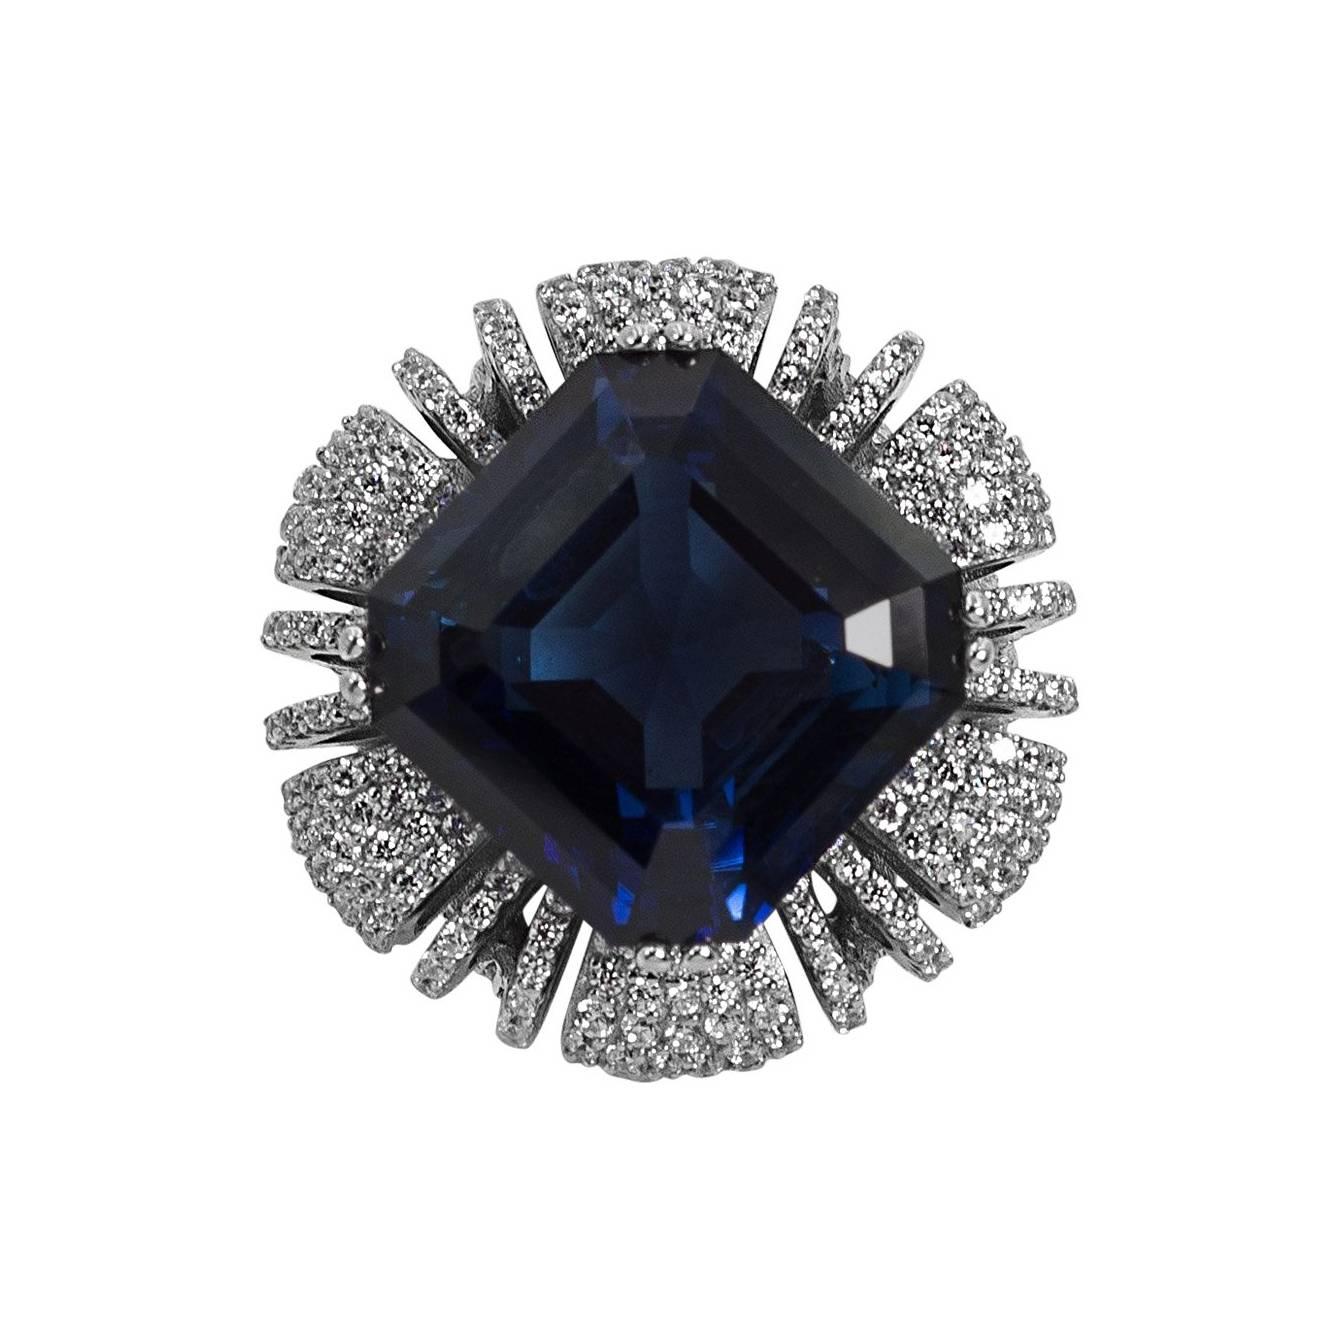 Clive Kandel 10 Carat Faux Sapphire Cubic Zirconia Sterling Statement Ring